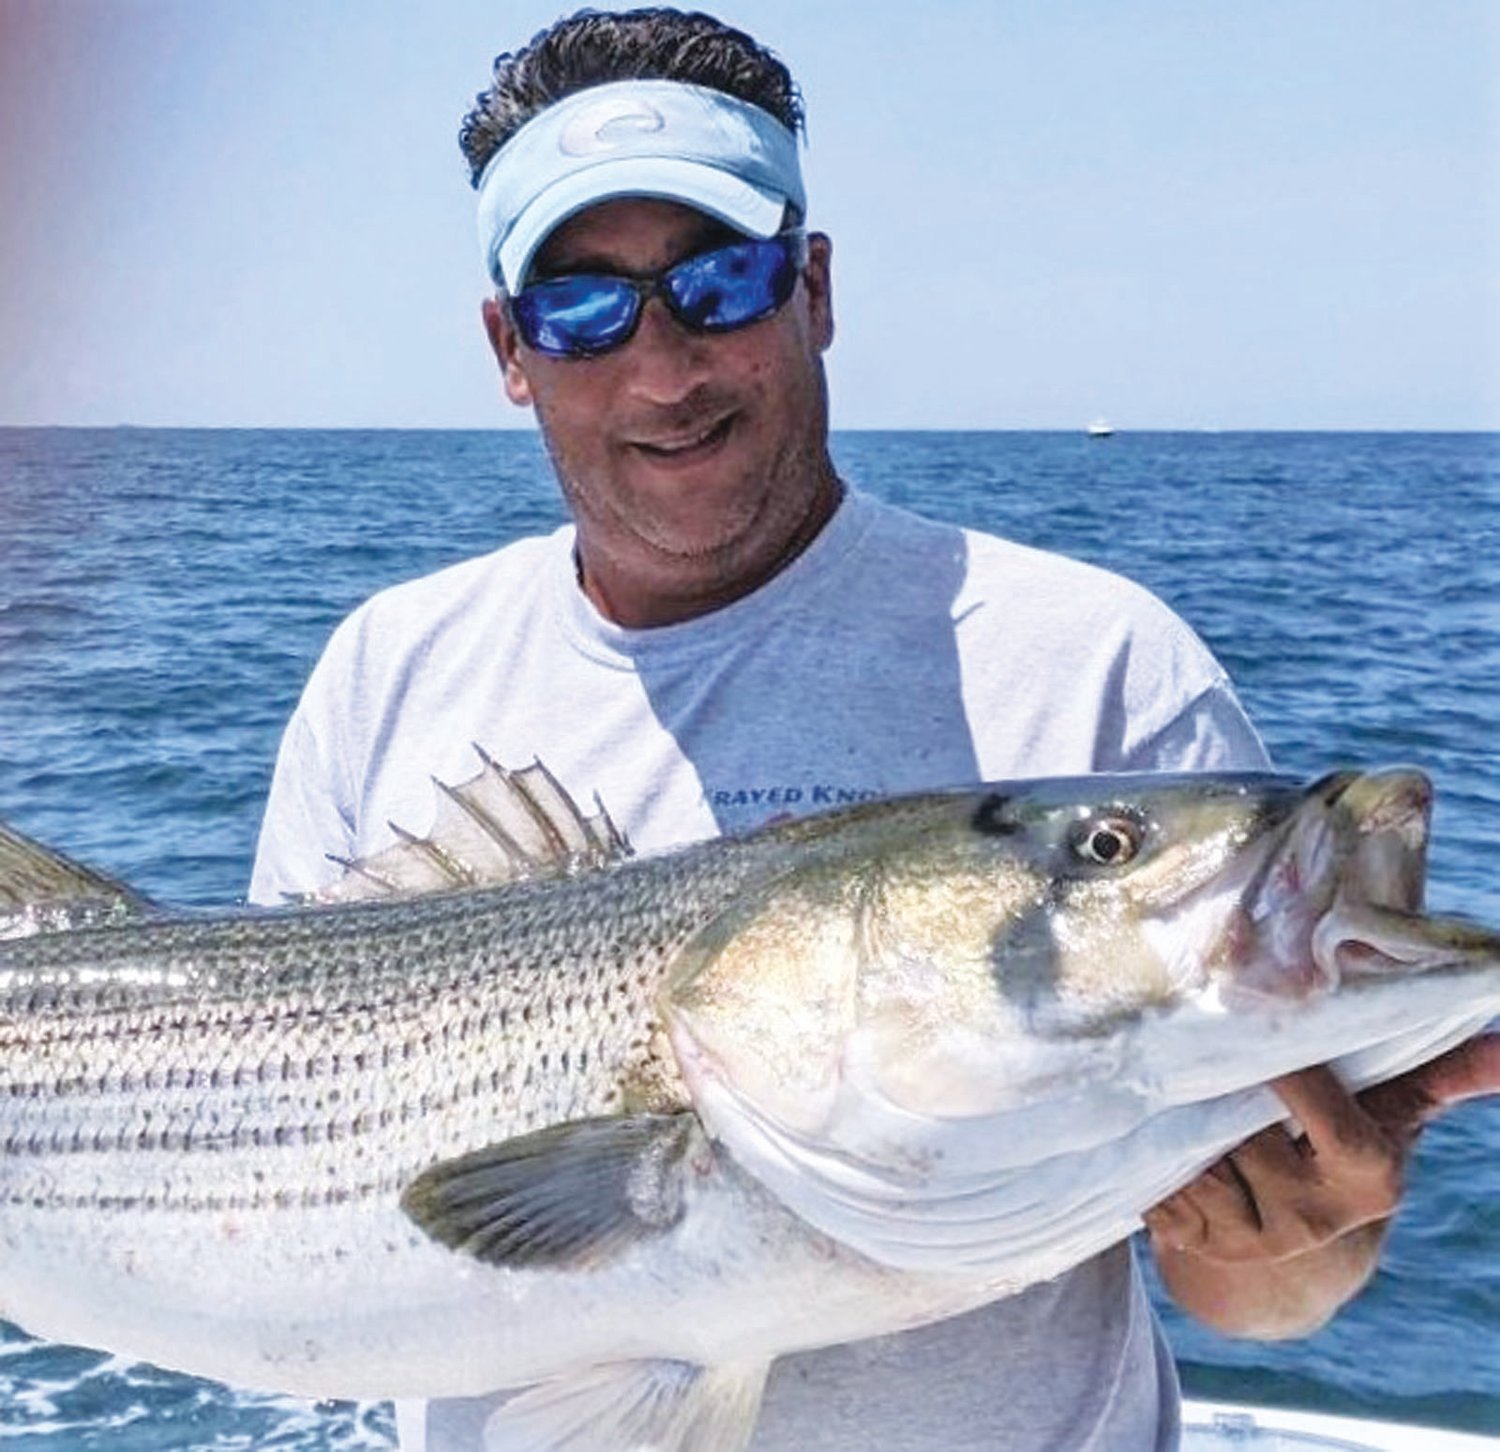 WINNING BASS: Richard Lipsitz of North Kingstown with the 47.5-inch striped bass that took first place, his team “Frayed Knot” took the team award too in the Block Island Inshore Tournament.